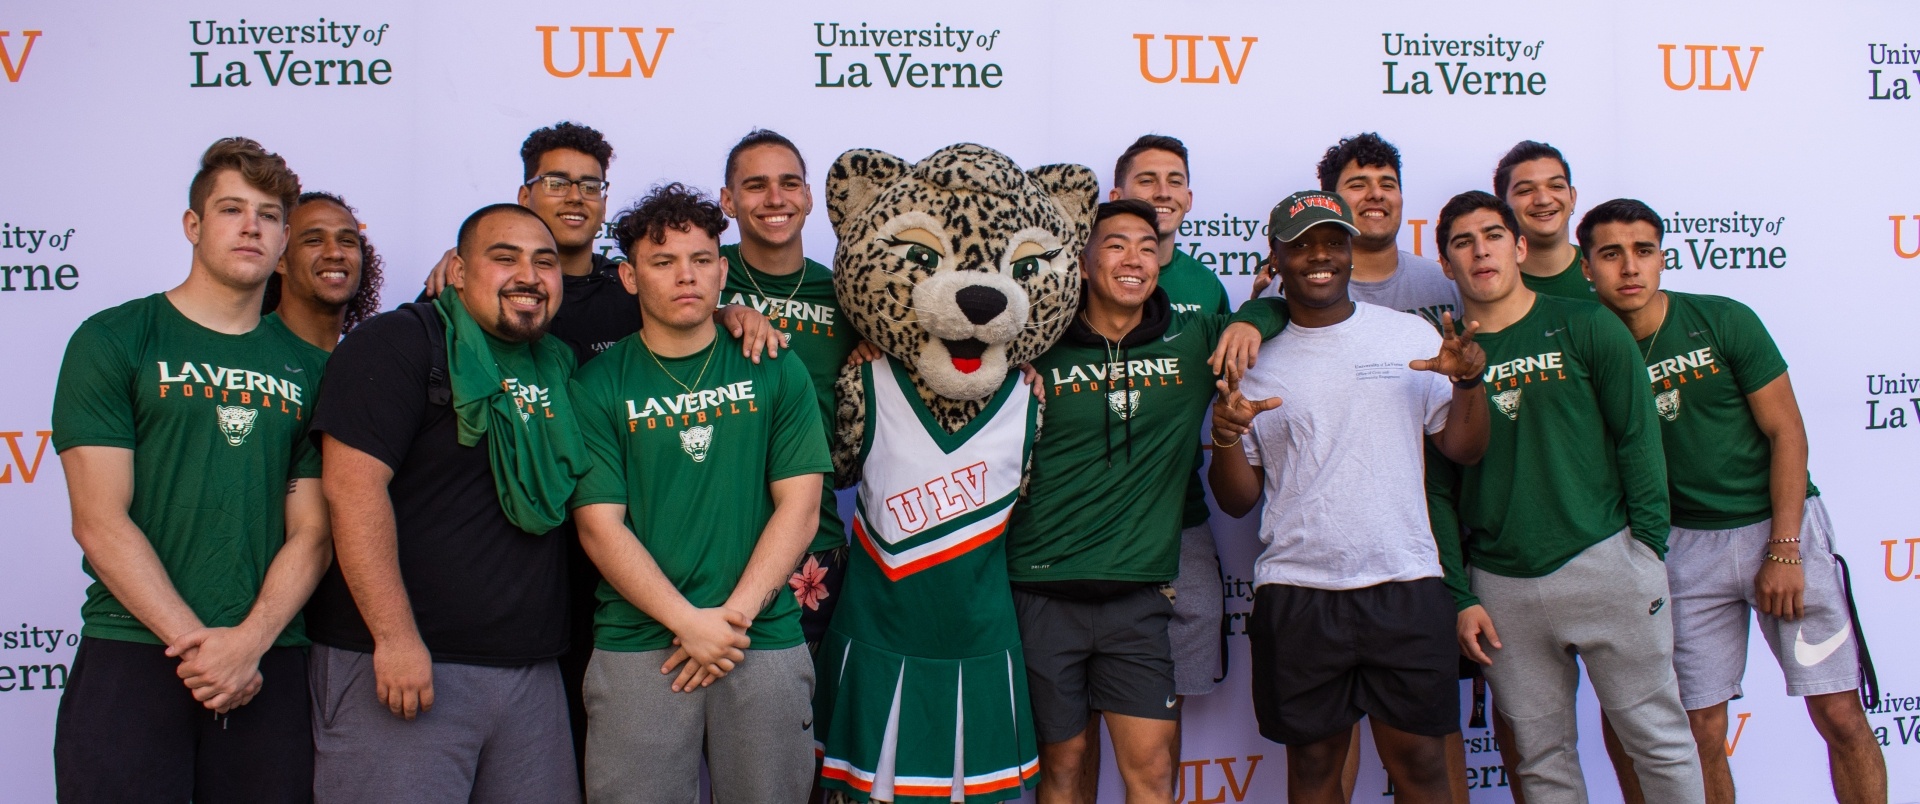 University of La Verne students take a photo with Lea the Leopard